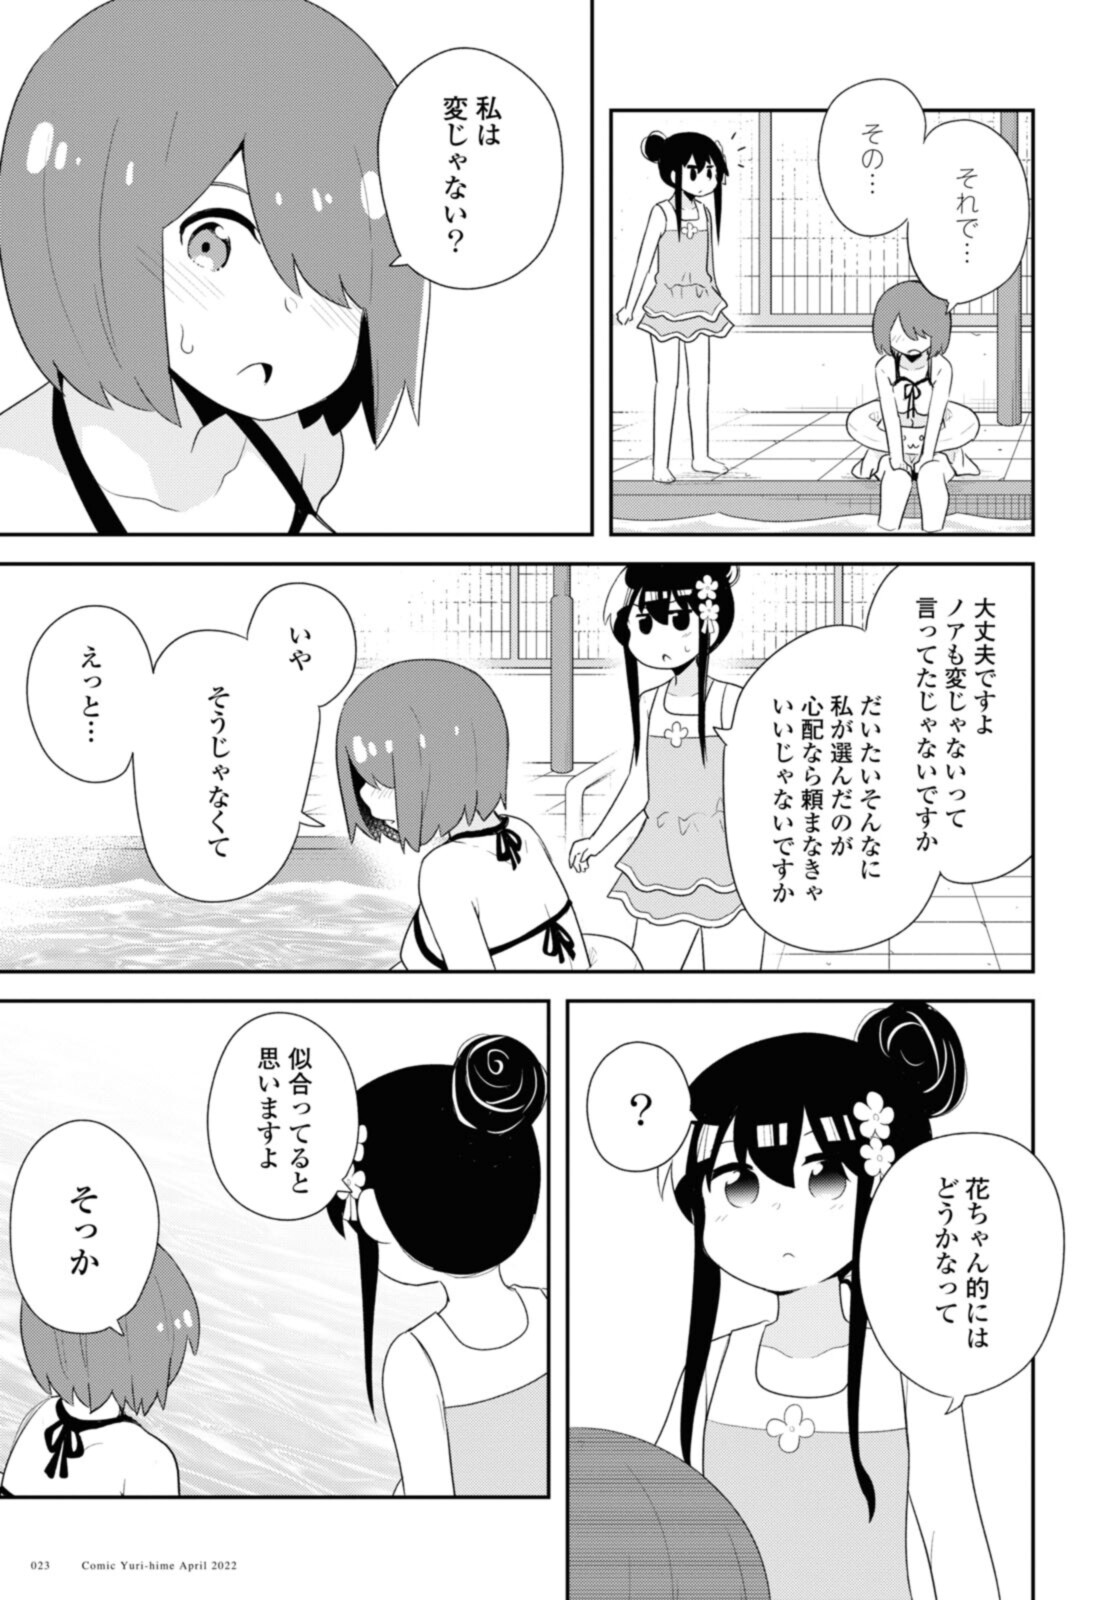 Wataten! An Angel Flew Down to Me 私に天使が舞い降りた！ 第94.2話 - Page 9